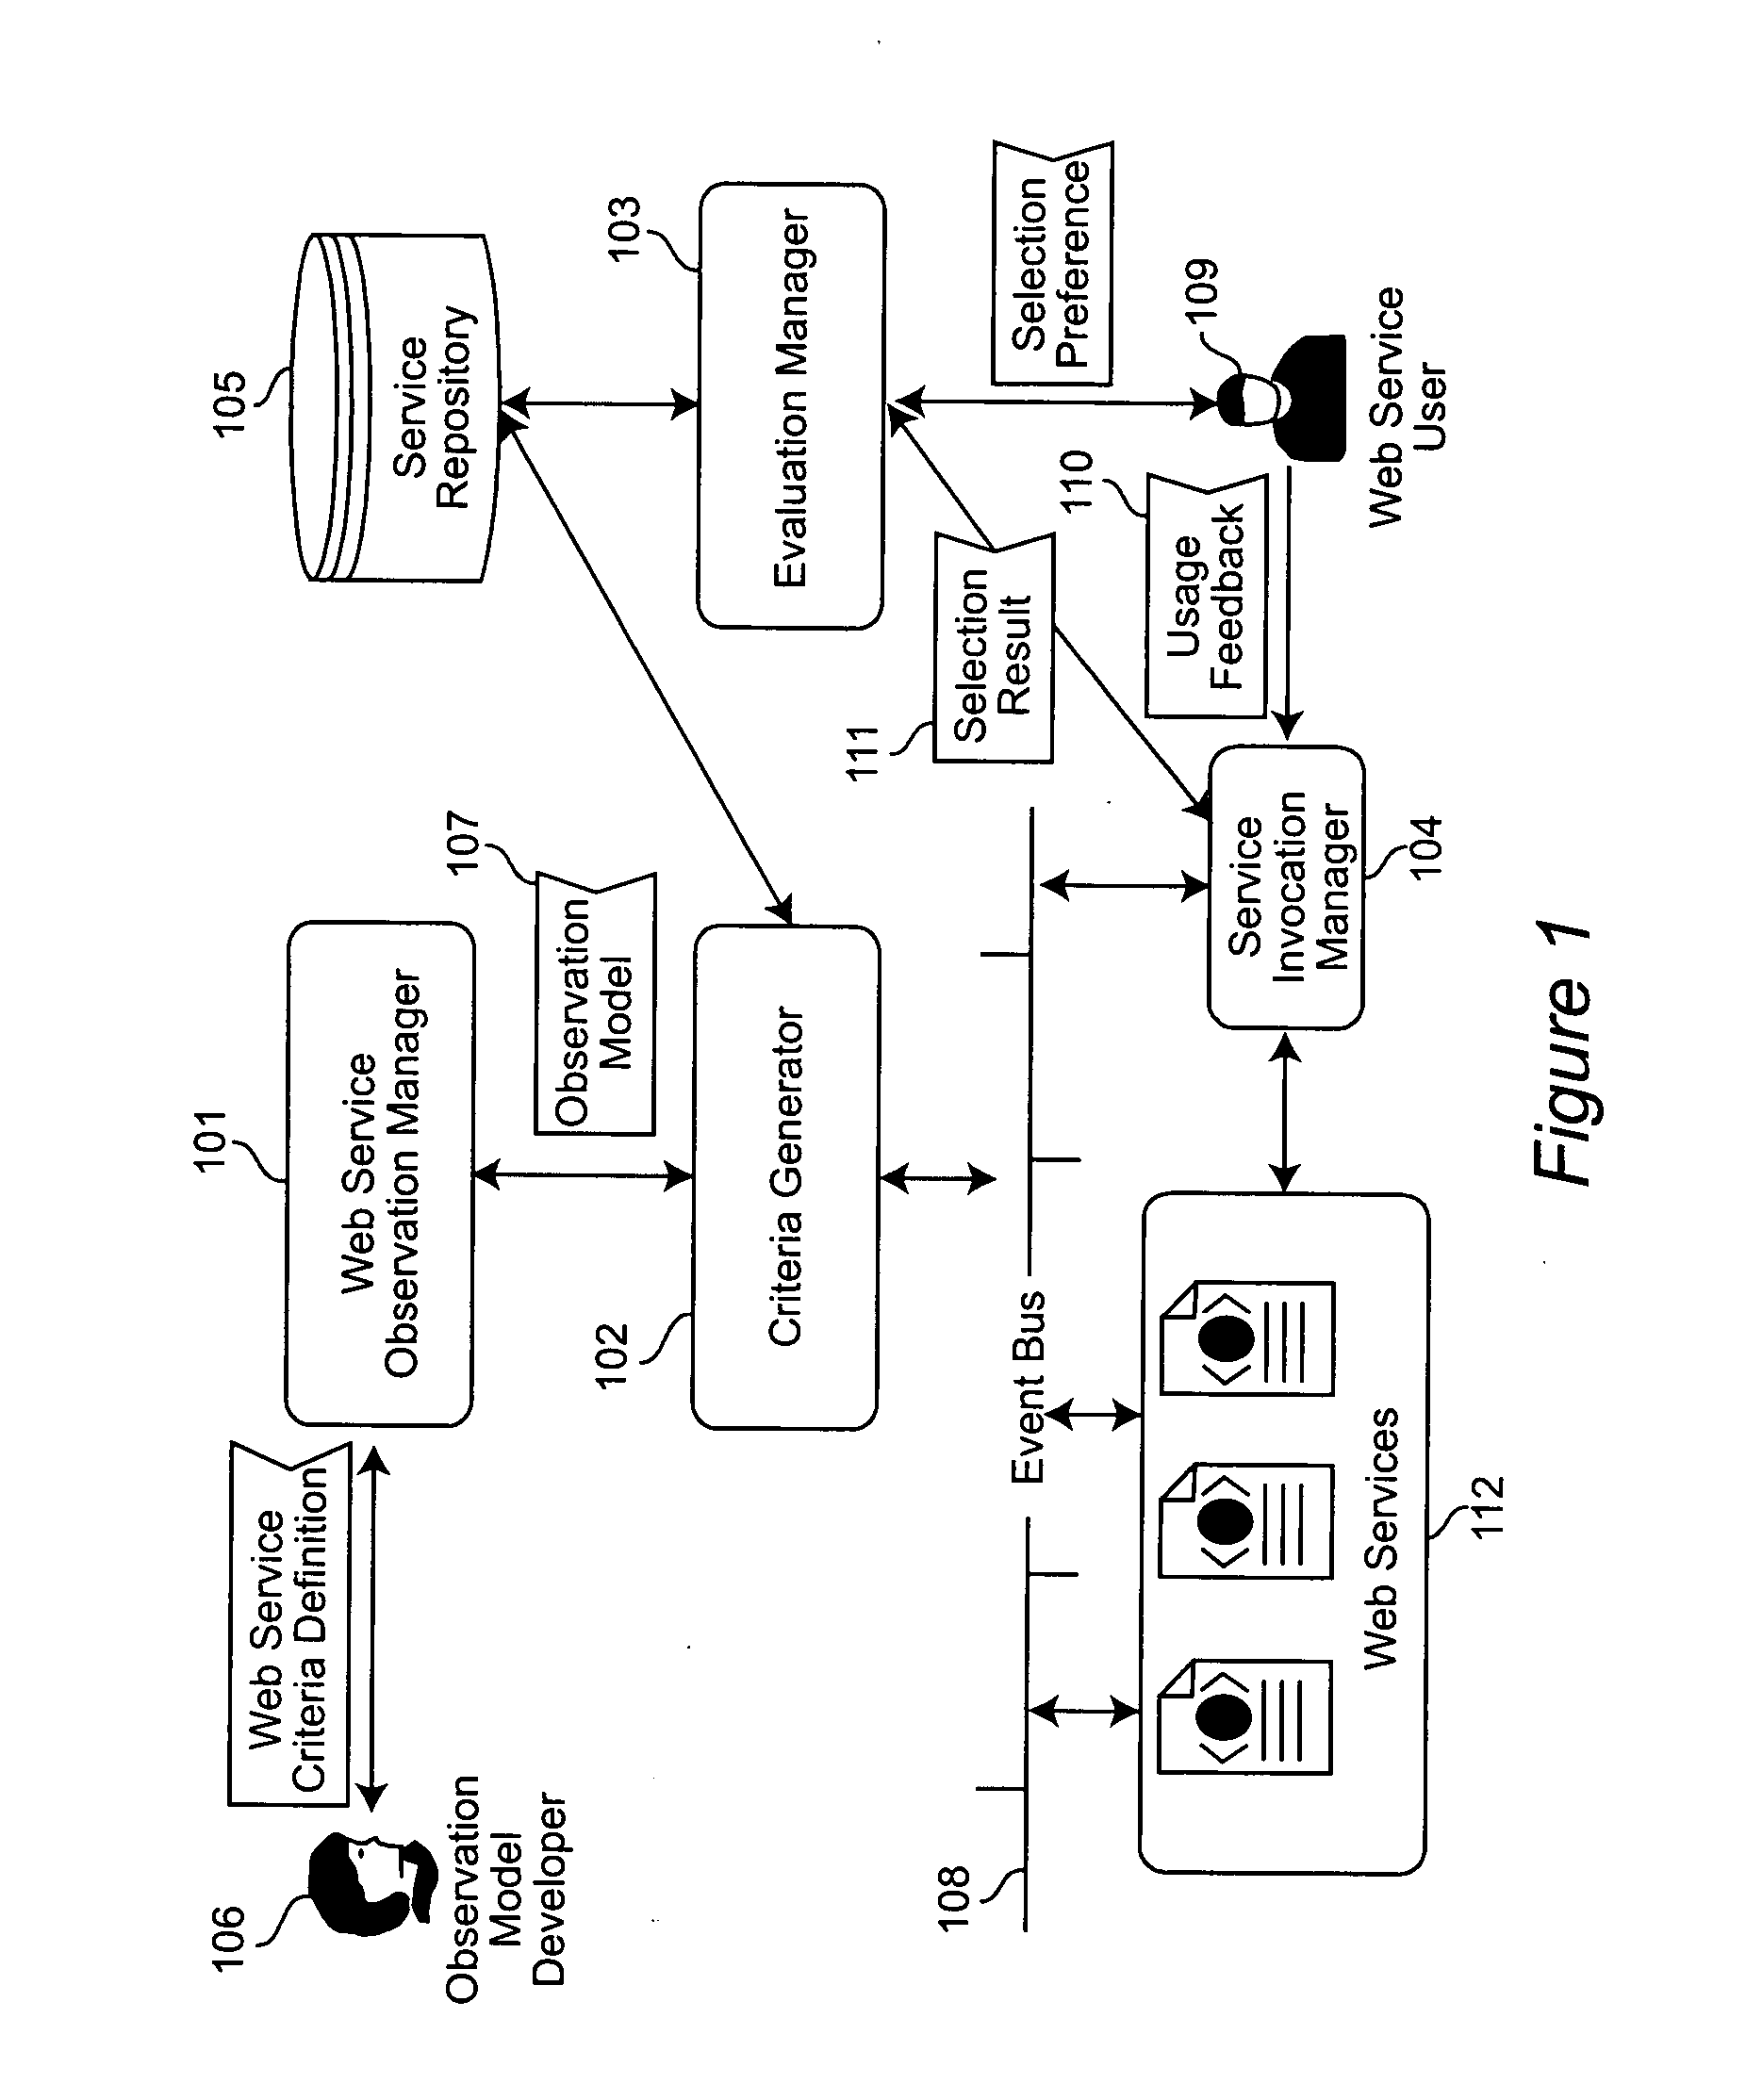 System and method for web service QoS observation and dynamic selection